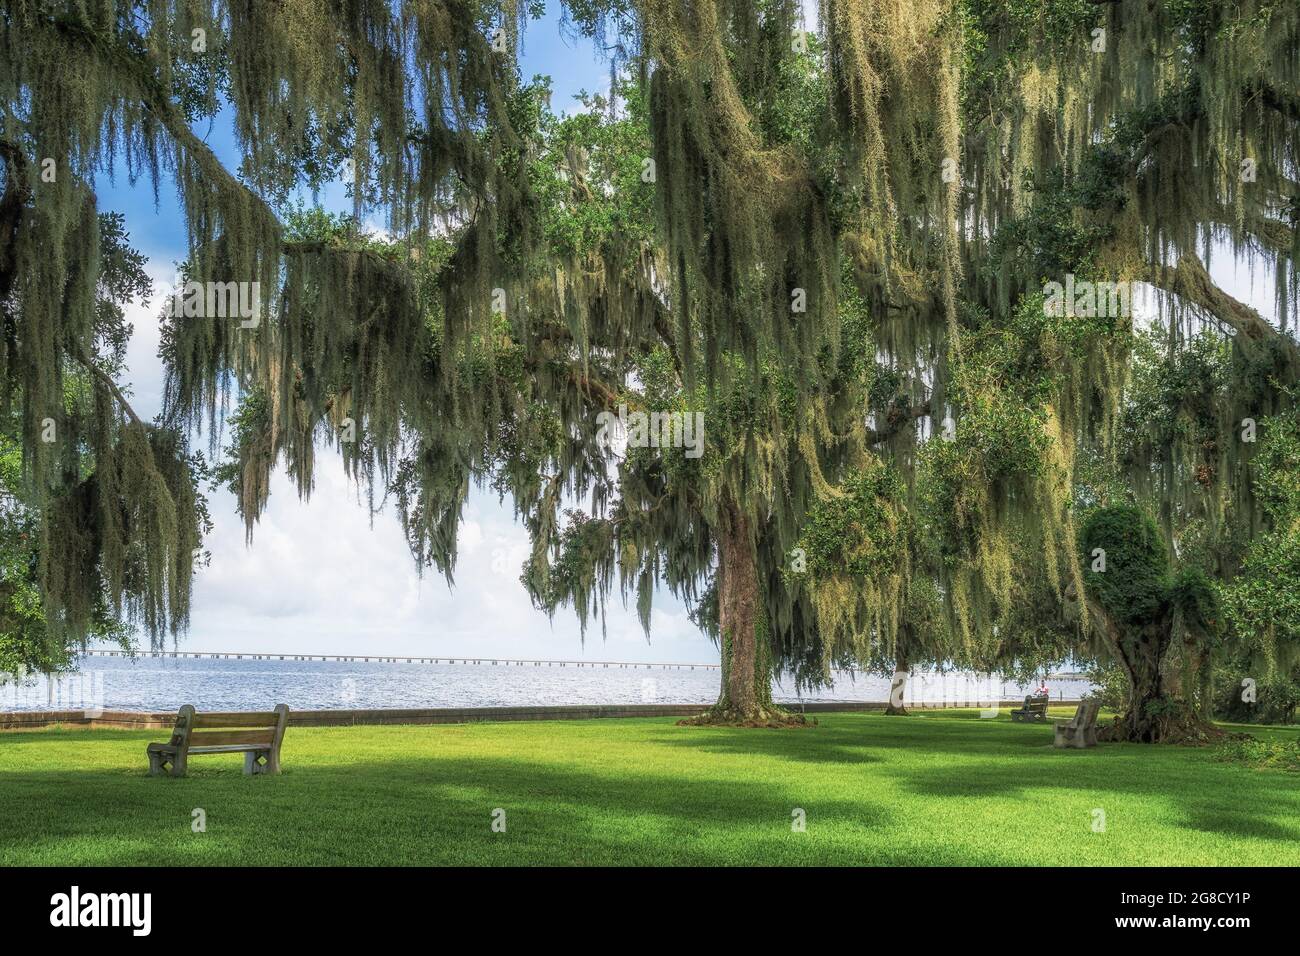 Lake Pontchartrain northshore, north shore lakefront park with Southern Live Oak trees and New Orleans causeway, Mandeville, Louisiana, USA. Stock Photo